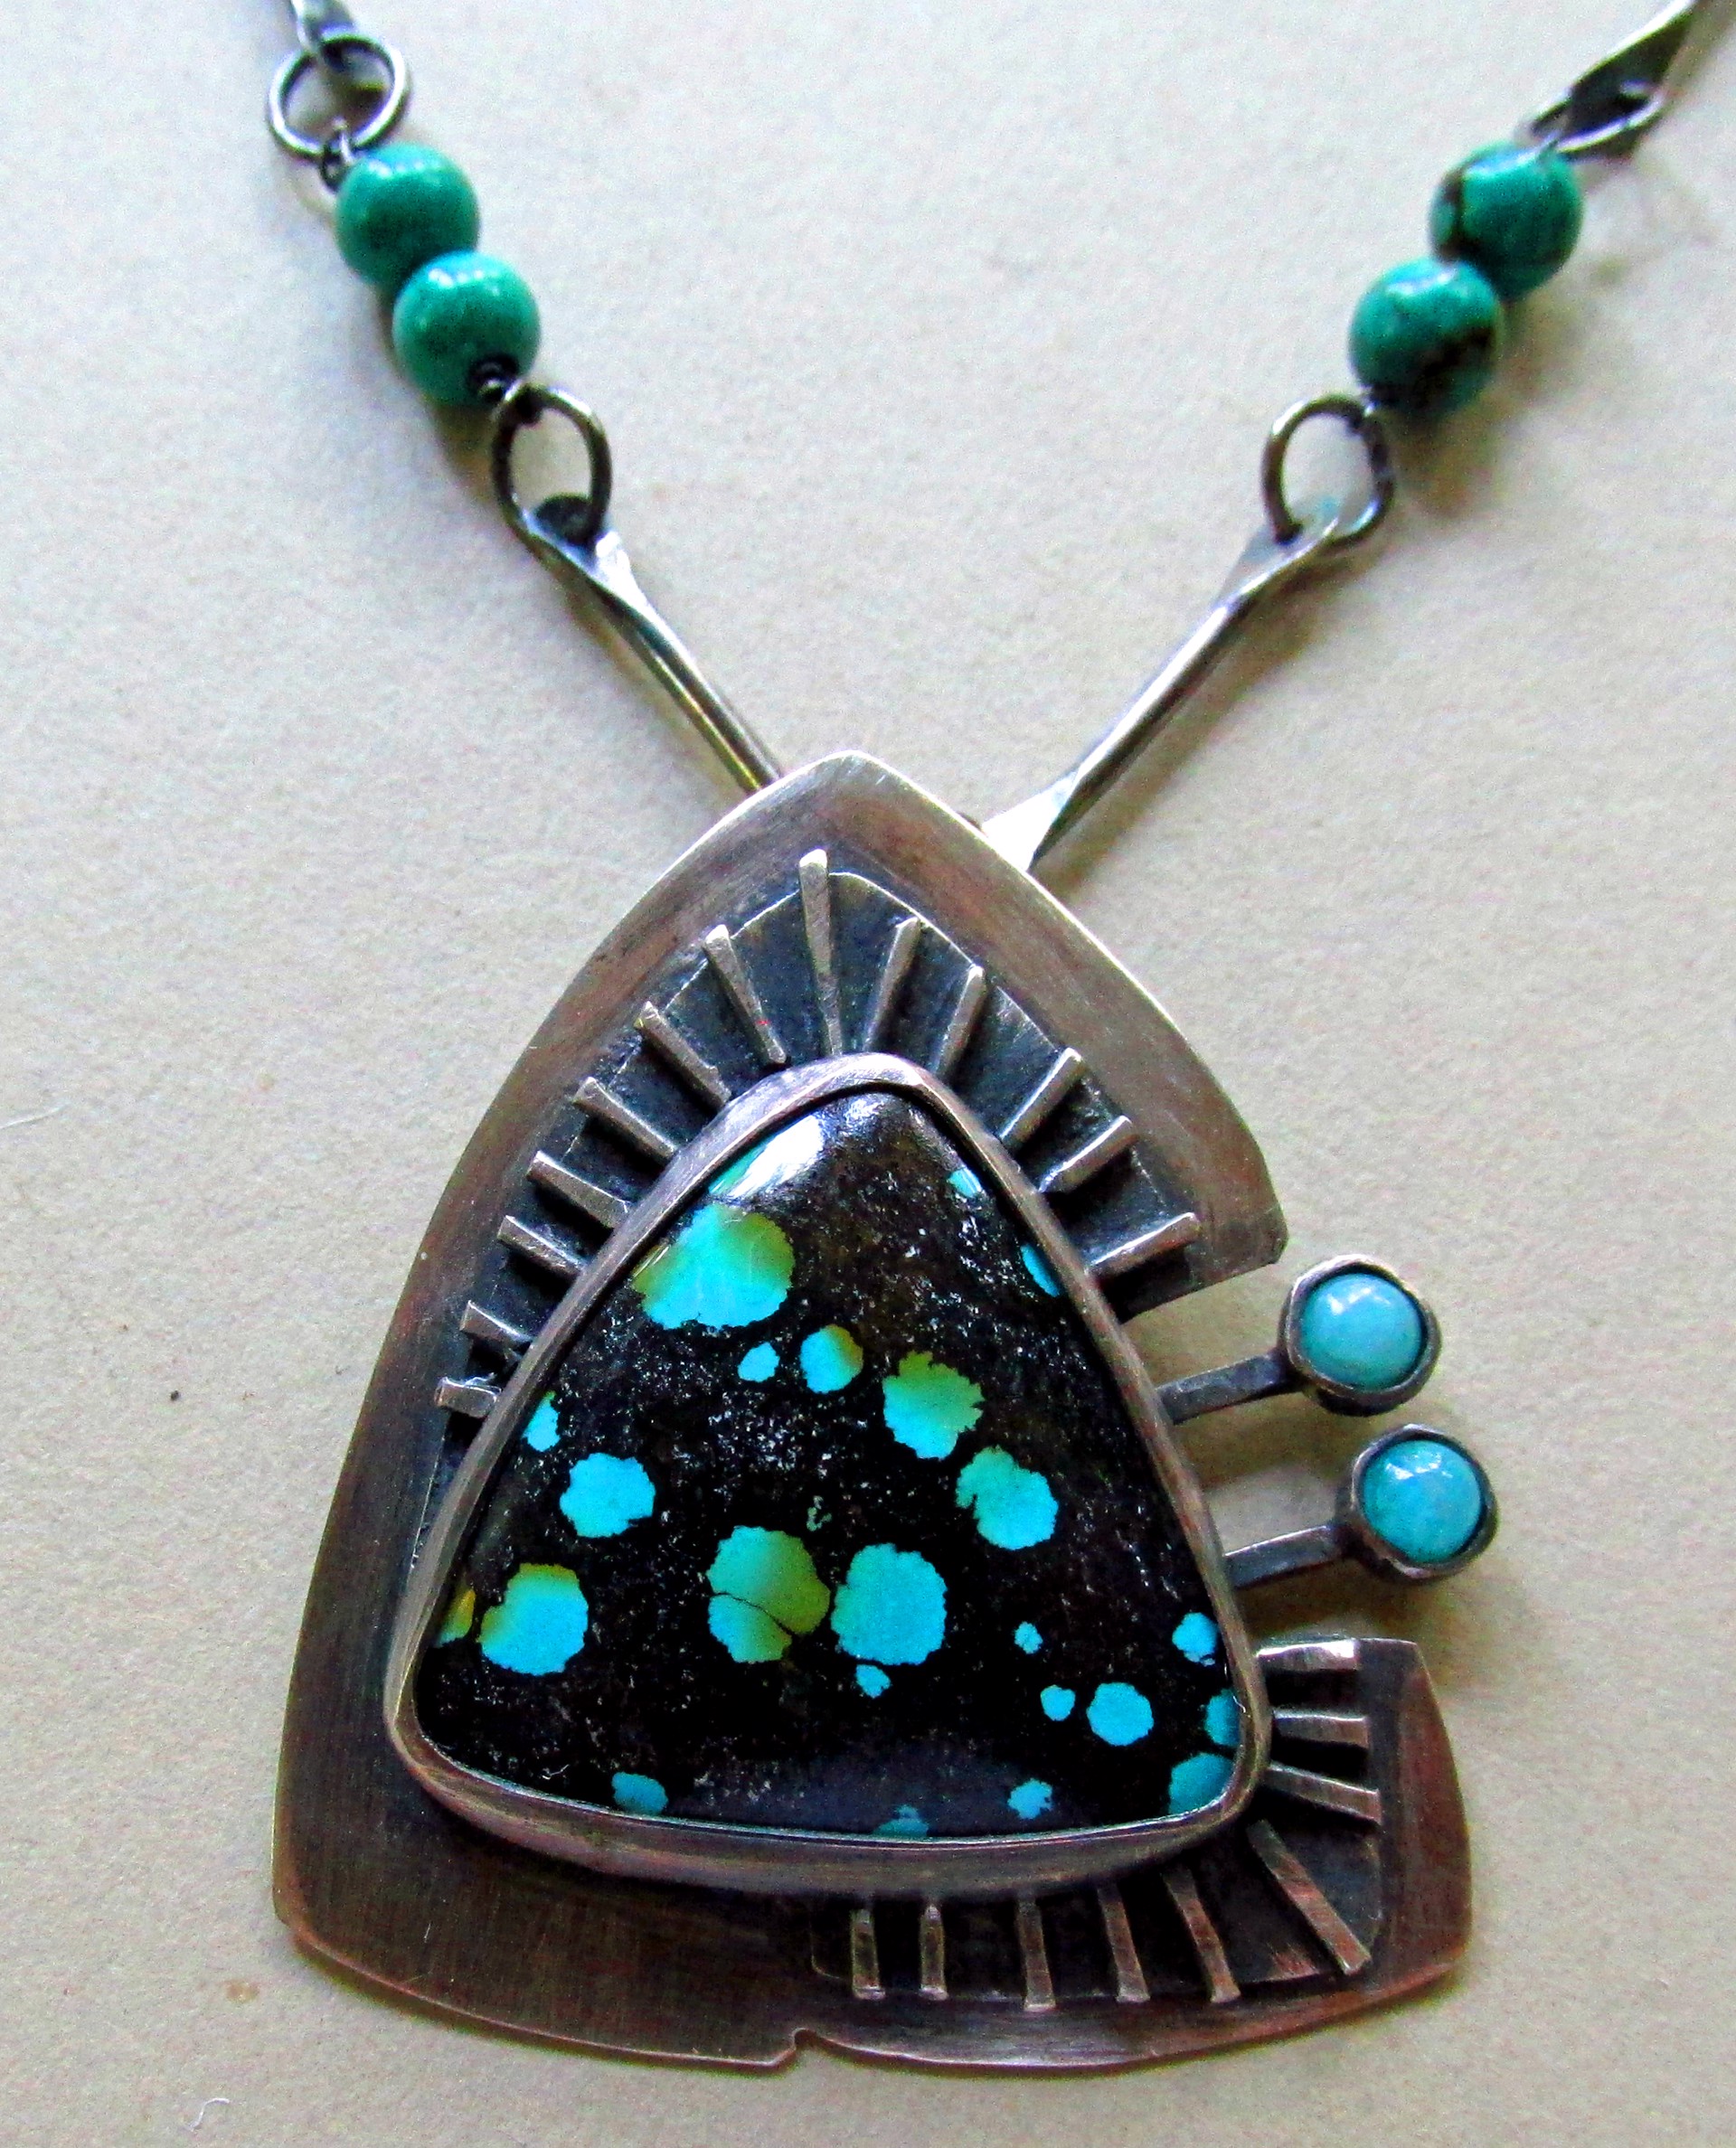 Turquoise and Amazonite on a Handmade Necklace Chain with Turquoise Beads by Anne Rob